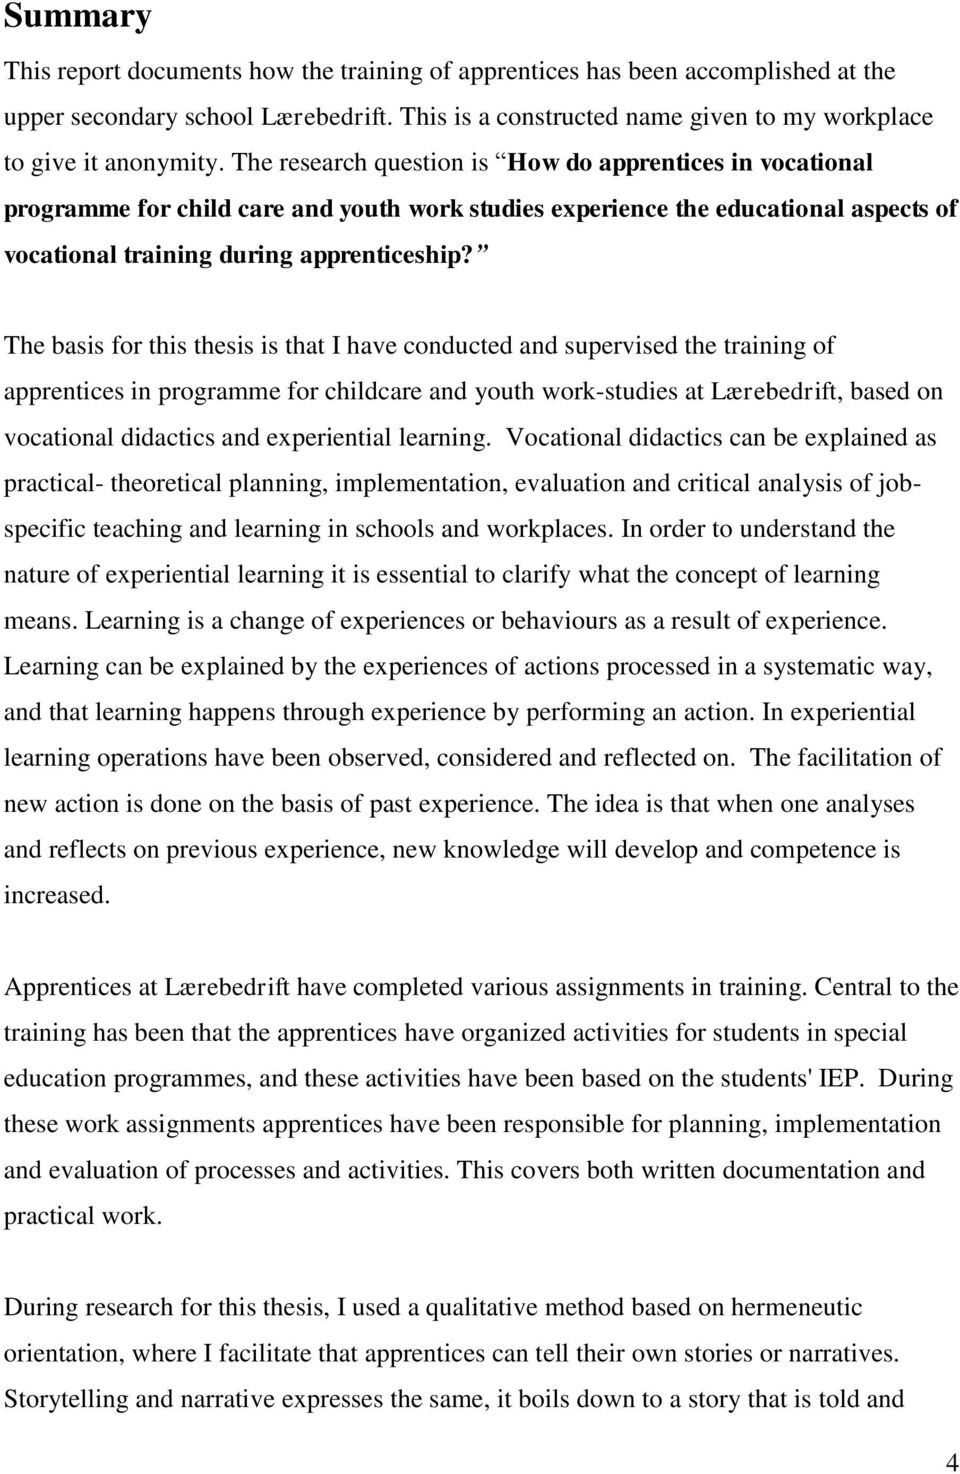 The basis for this thesis is that I have conducted and supervised the training of apprentices in programme for childcare and youth work-studies at Lærebedrift, based on vocational didactics and